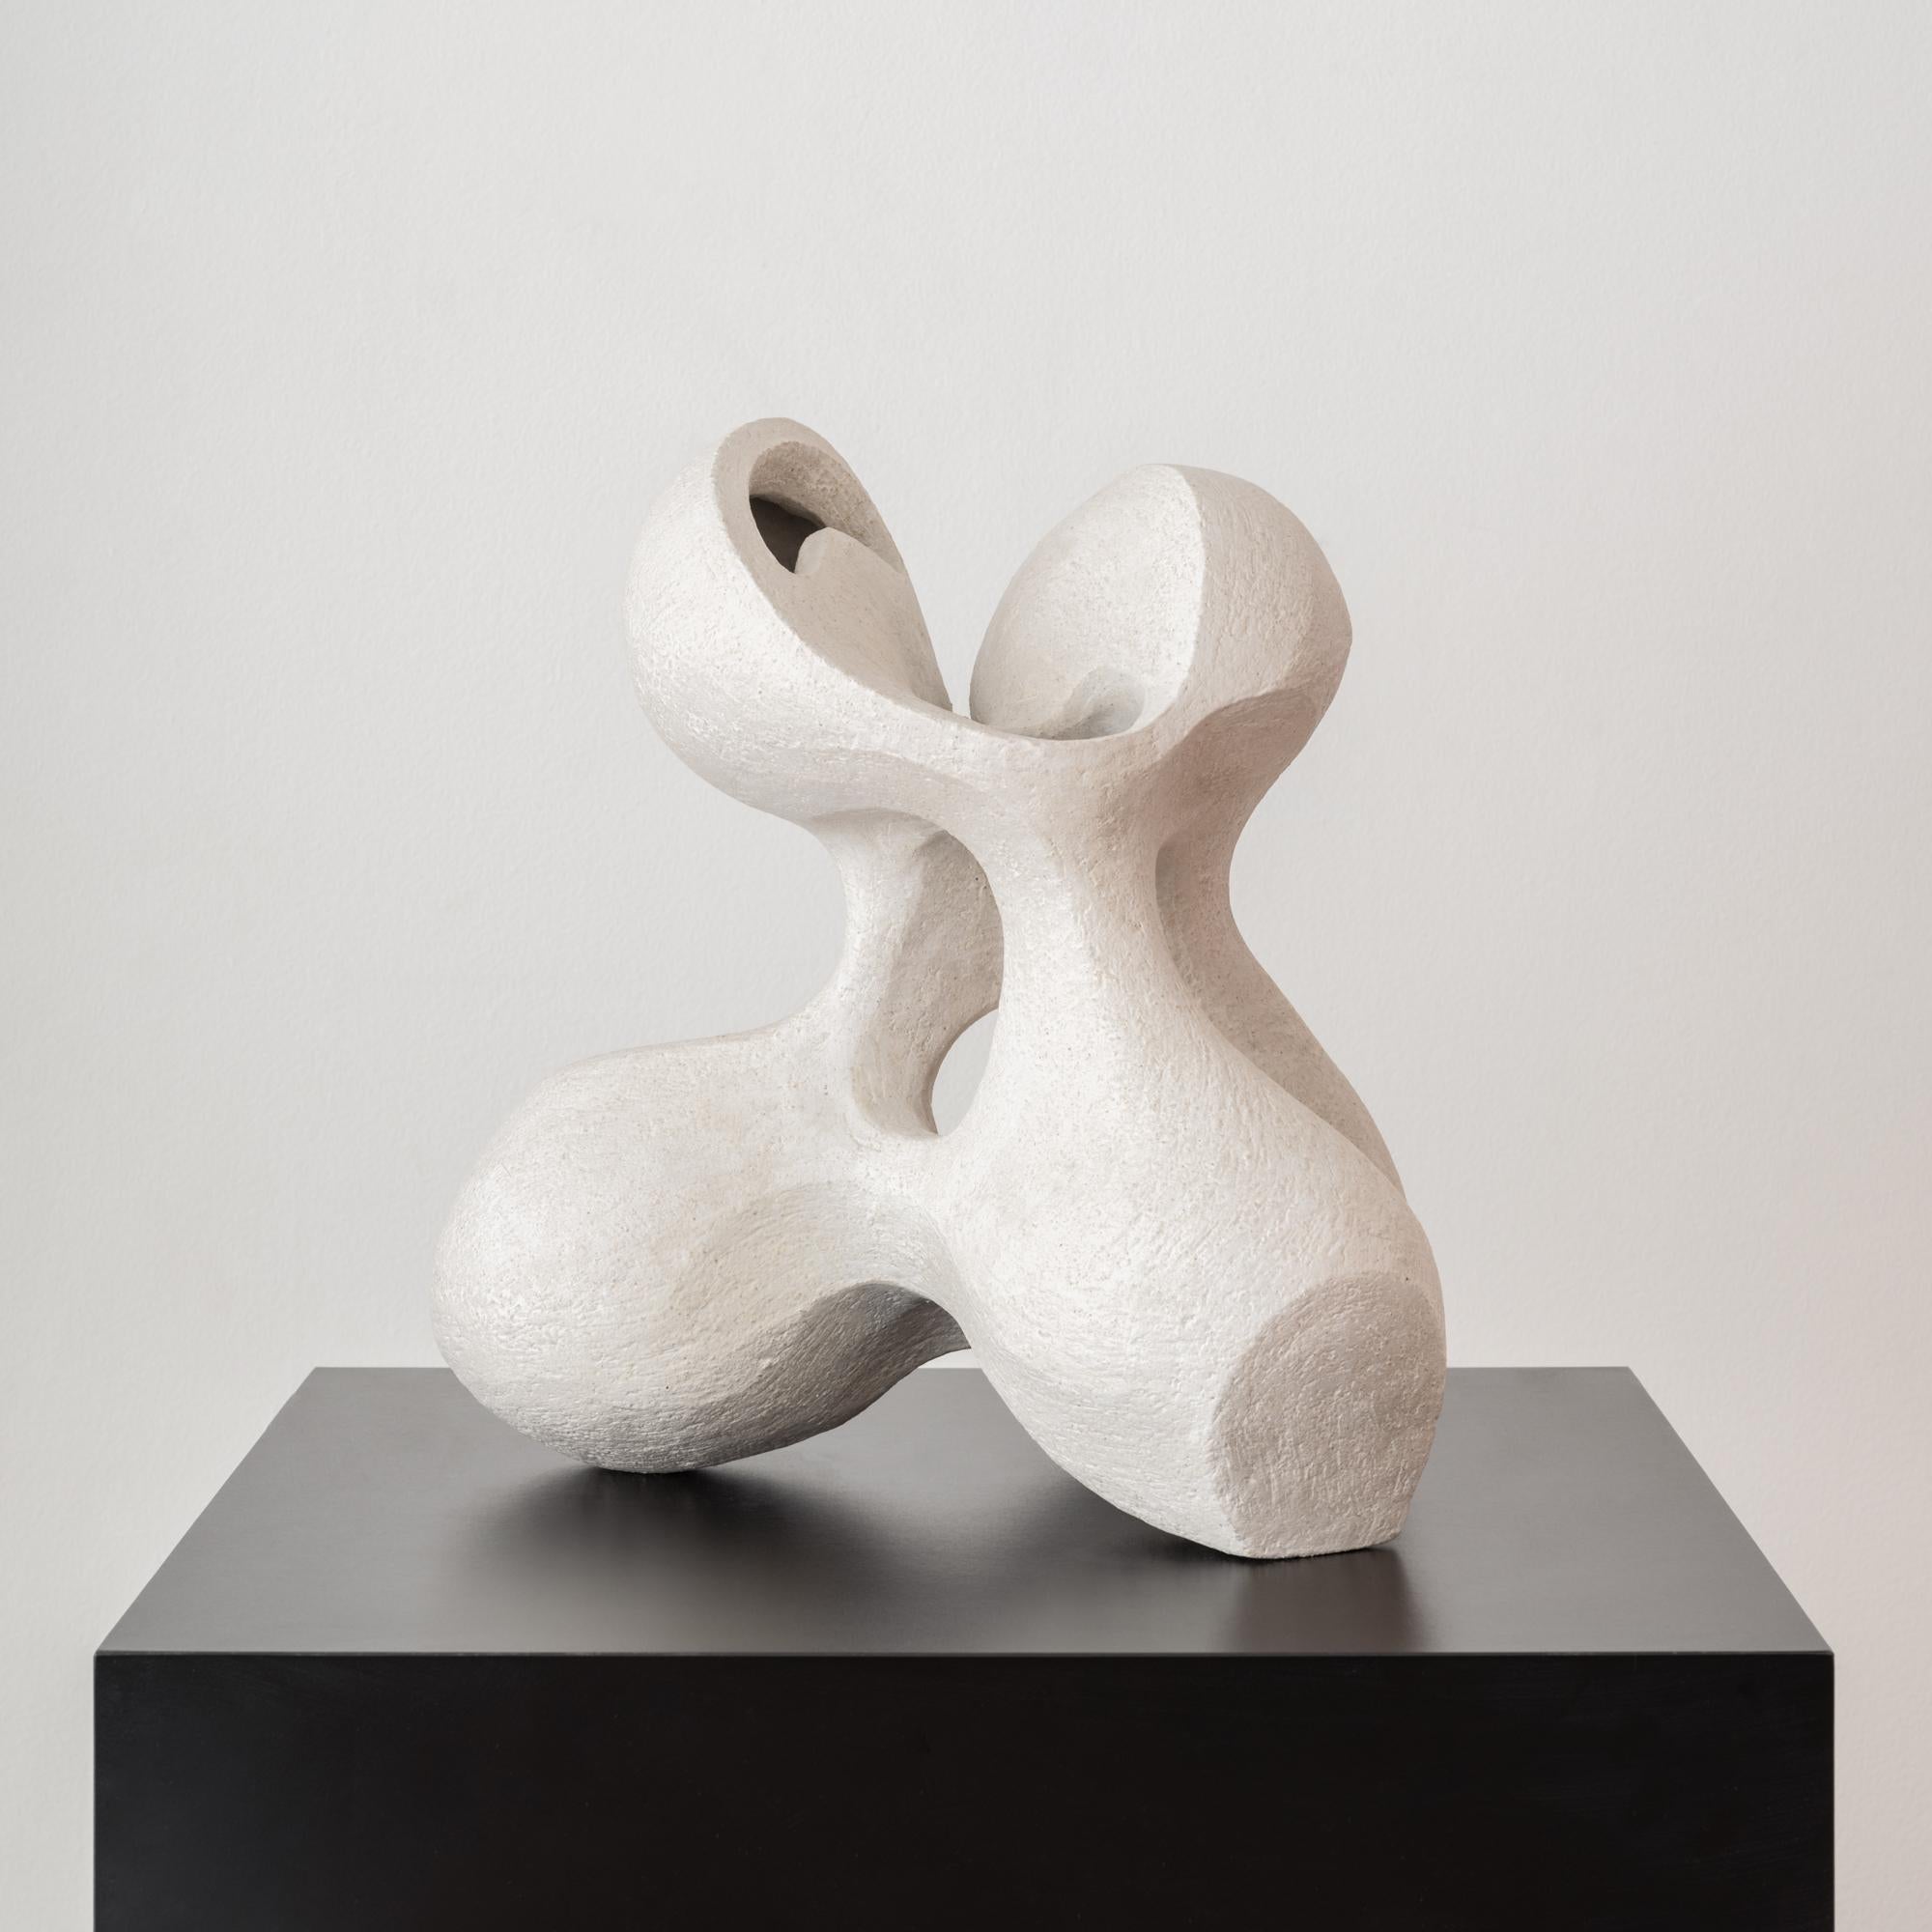 Entitled 'Matriarch', this original ceramic sculpture by Simone Bodmer-Turner weaves a mesmerizing narrative, where each curve and crevice leads to unexpected connections and perspectives. As your eyes explore the contours of 'Matriarch',  a series